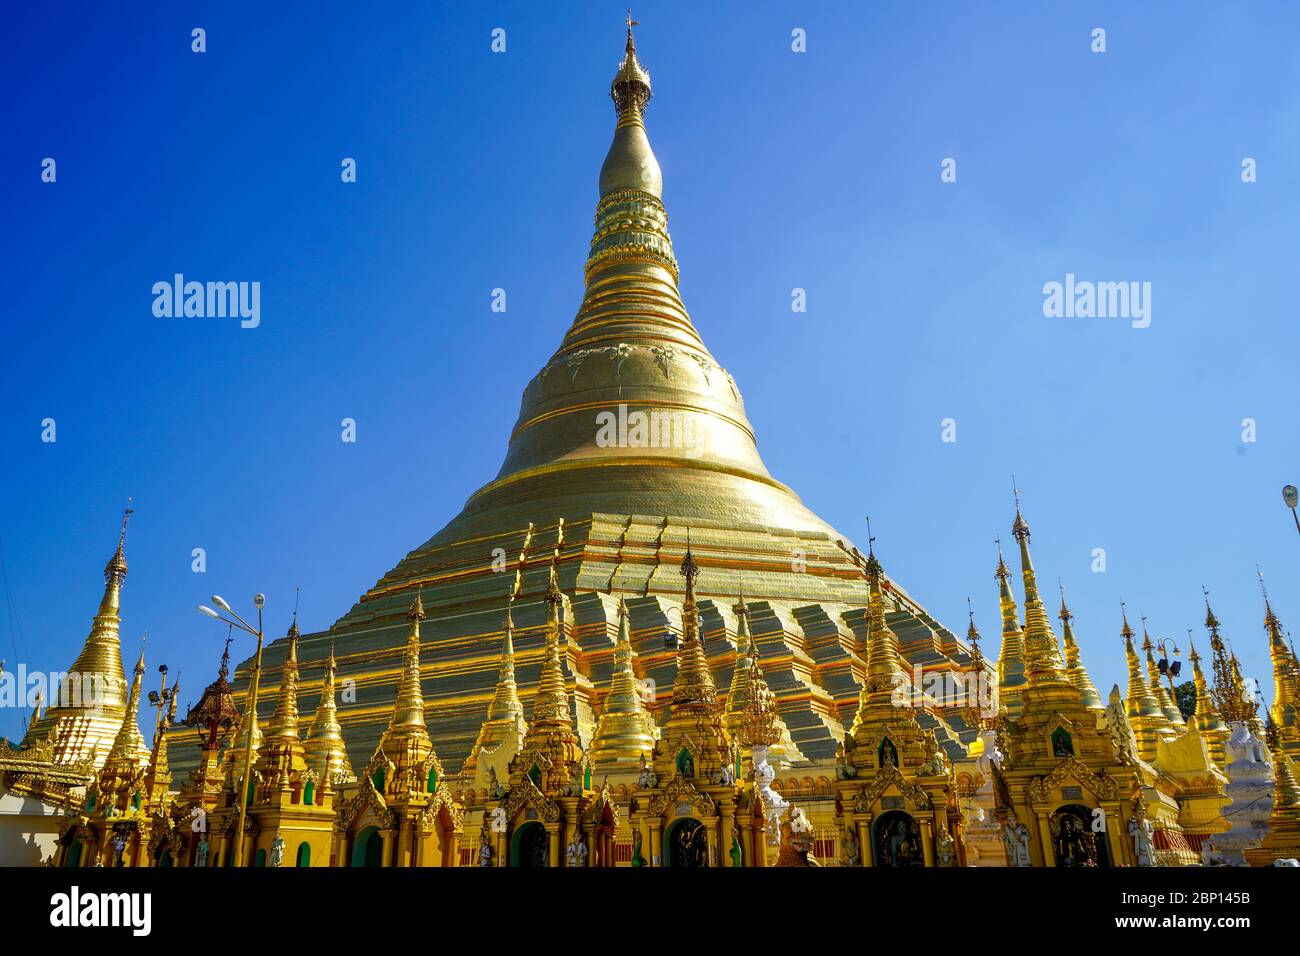 Shwedagon Pagoda, which is also known as Great Dagon or Golden Pagoda in Yangon, Myanmar. December, 2019 Stock Photo